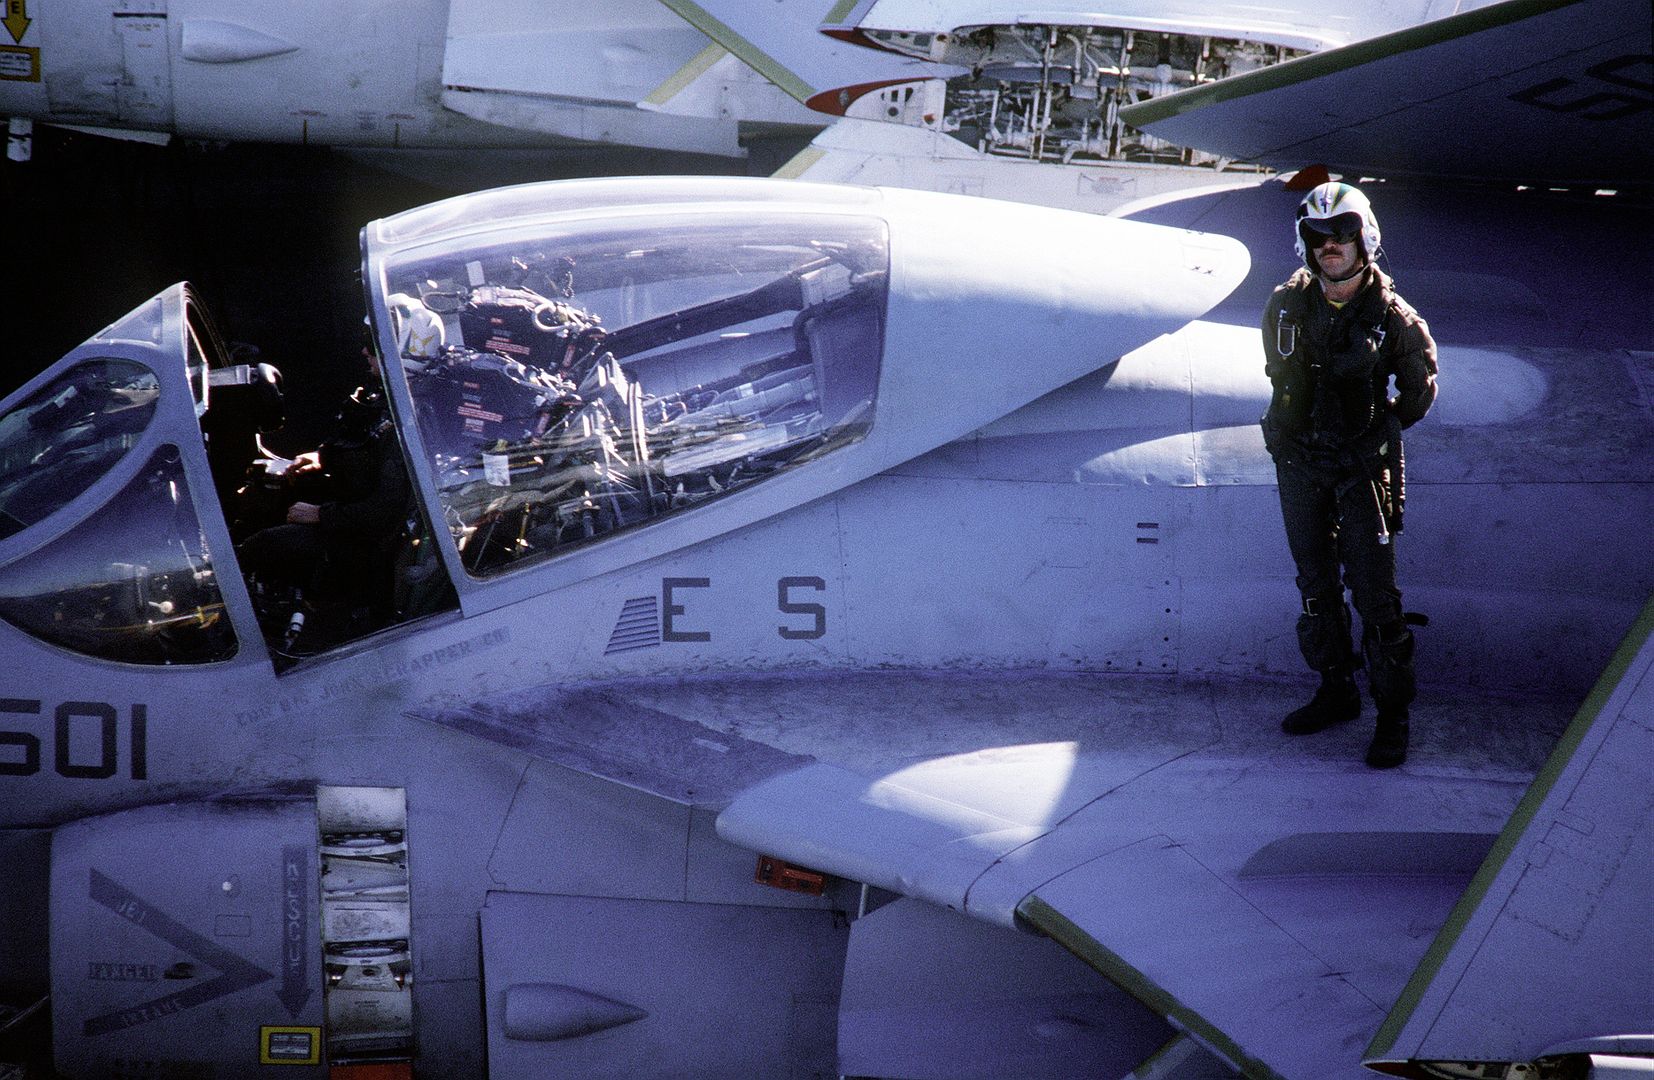 A Pilot Poses For A Photo Next To The Cockpit Of An A 6E Intruder Aircraft Parked On The Flight Deck Of Theaircraft Carrier USS KITTY HAWK